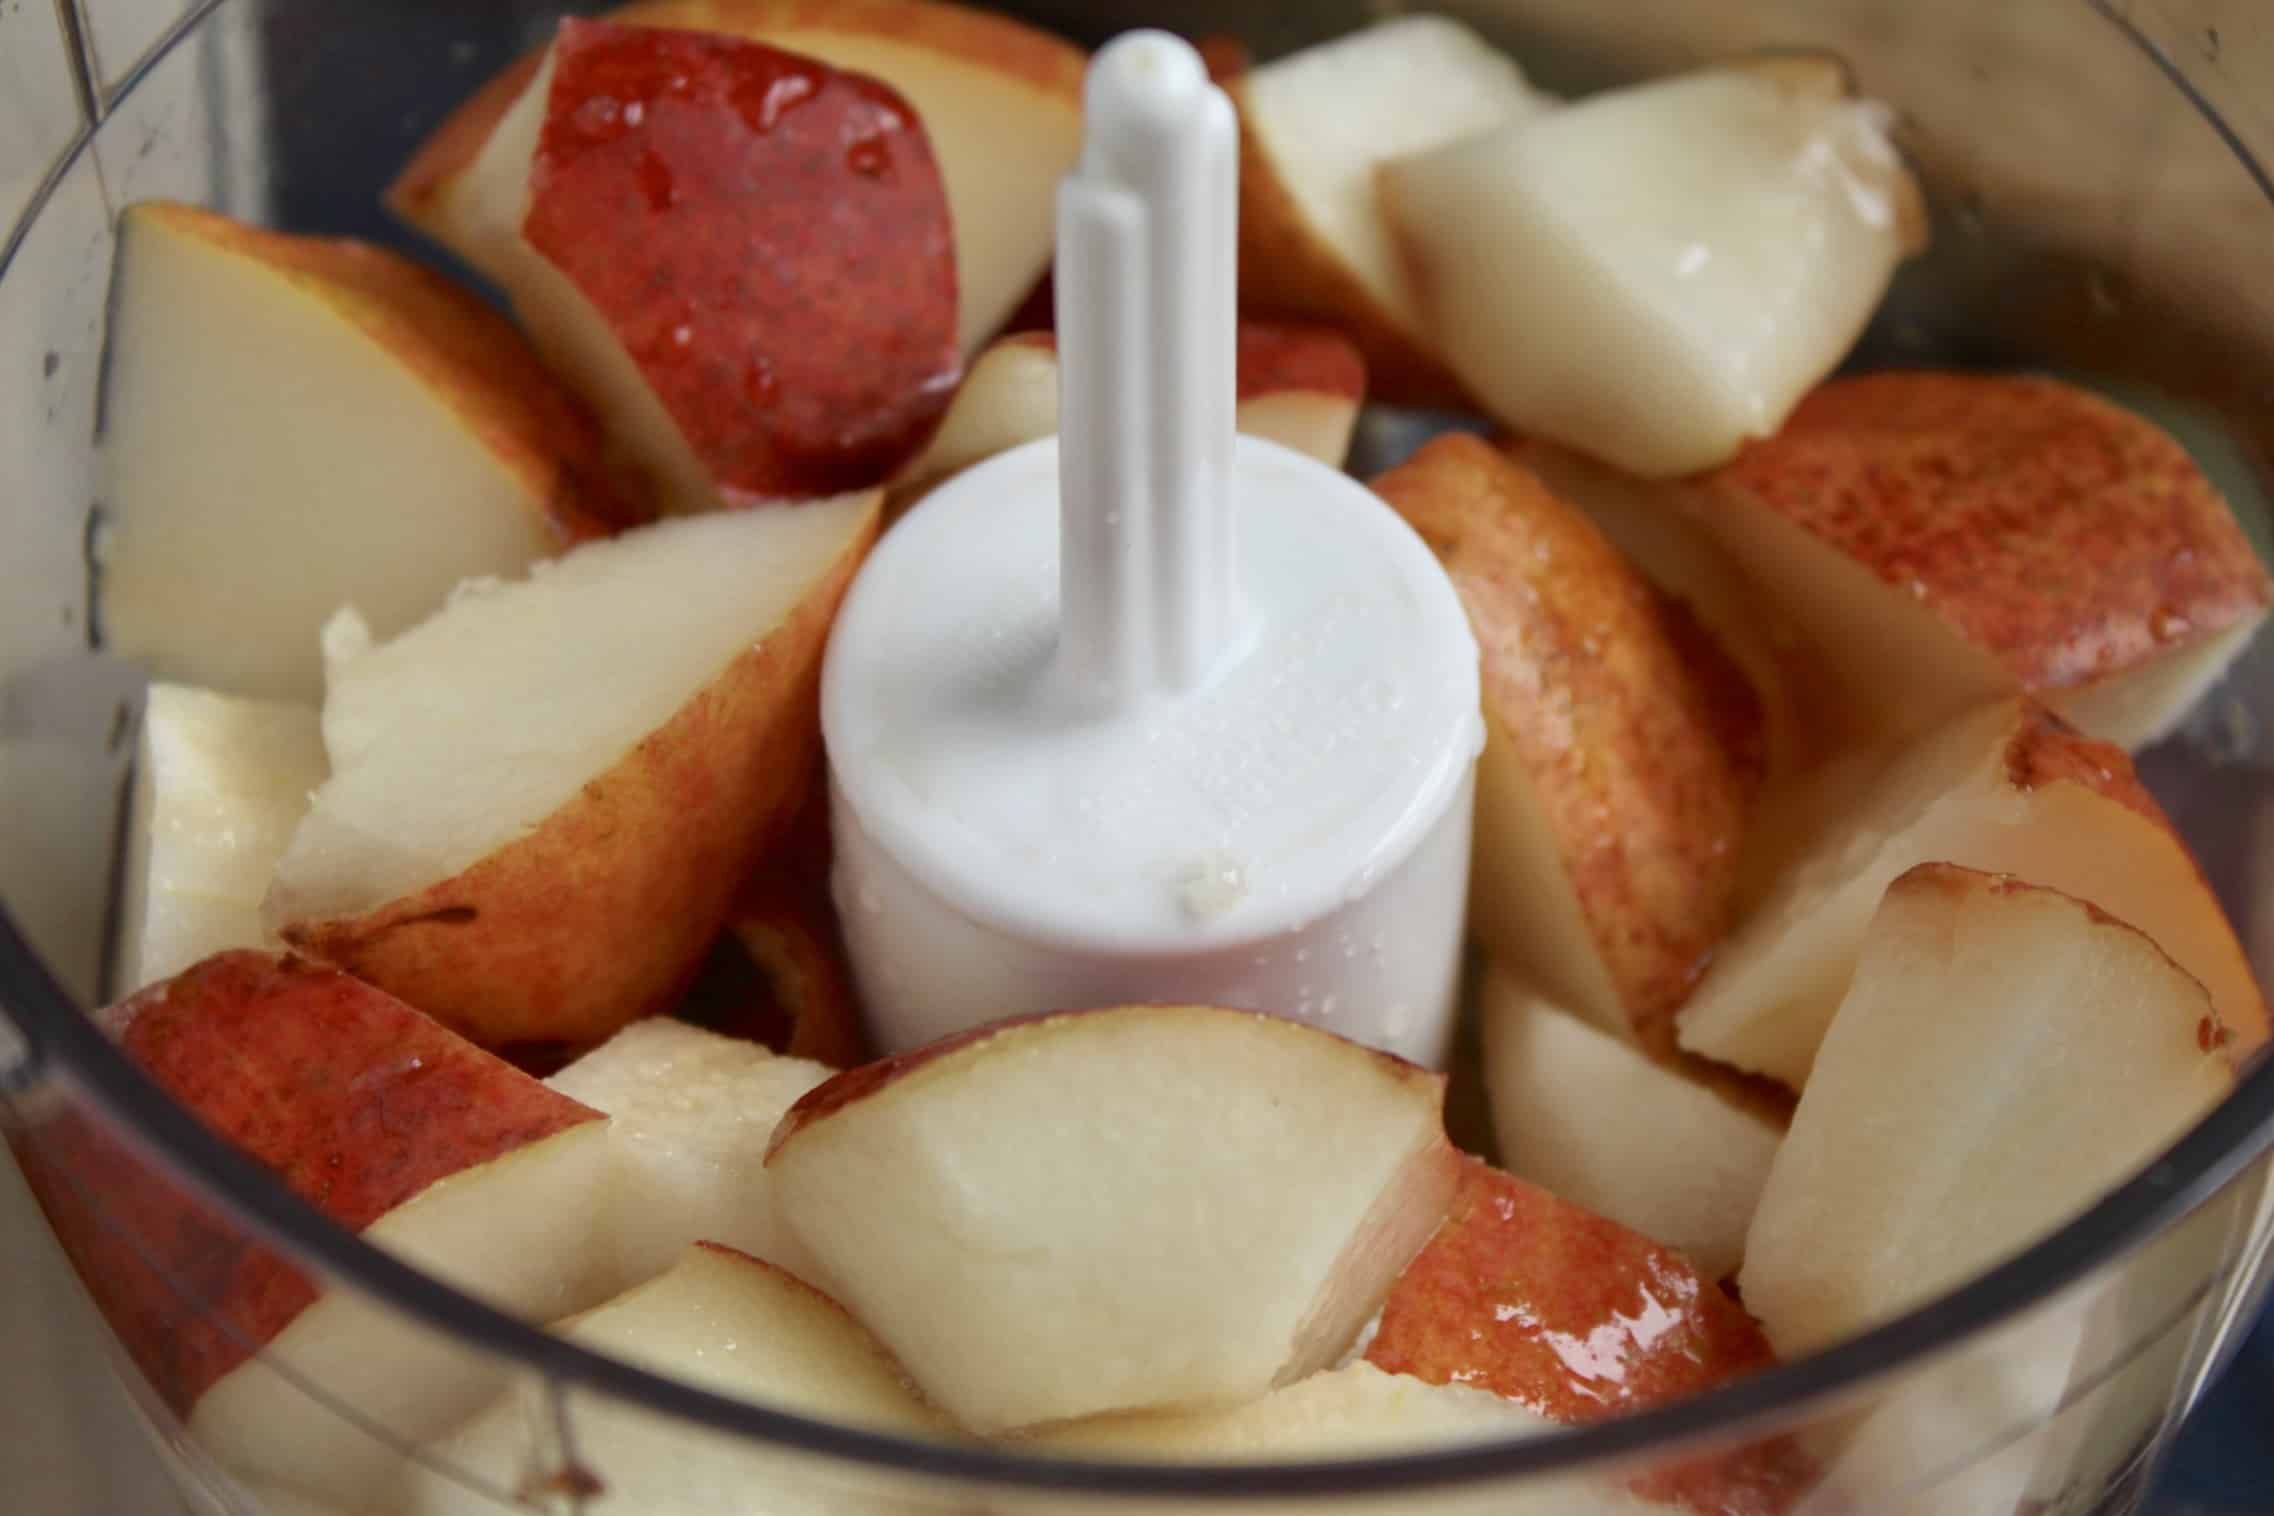 pear pieces in a food processor